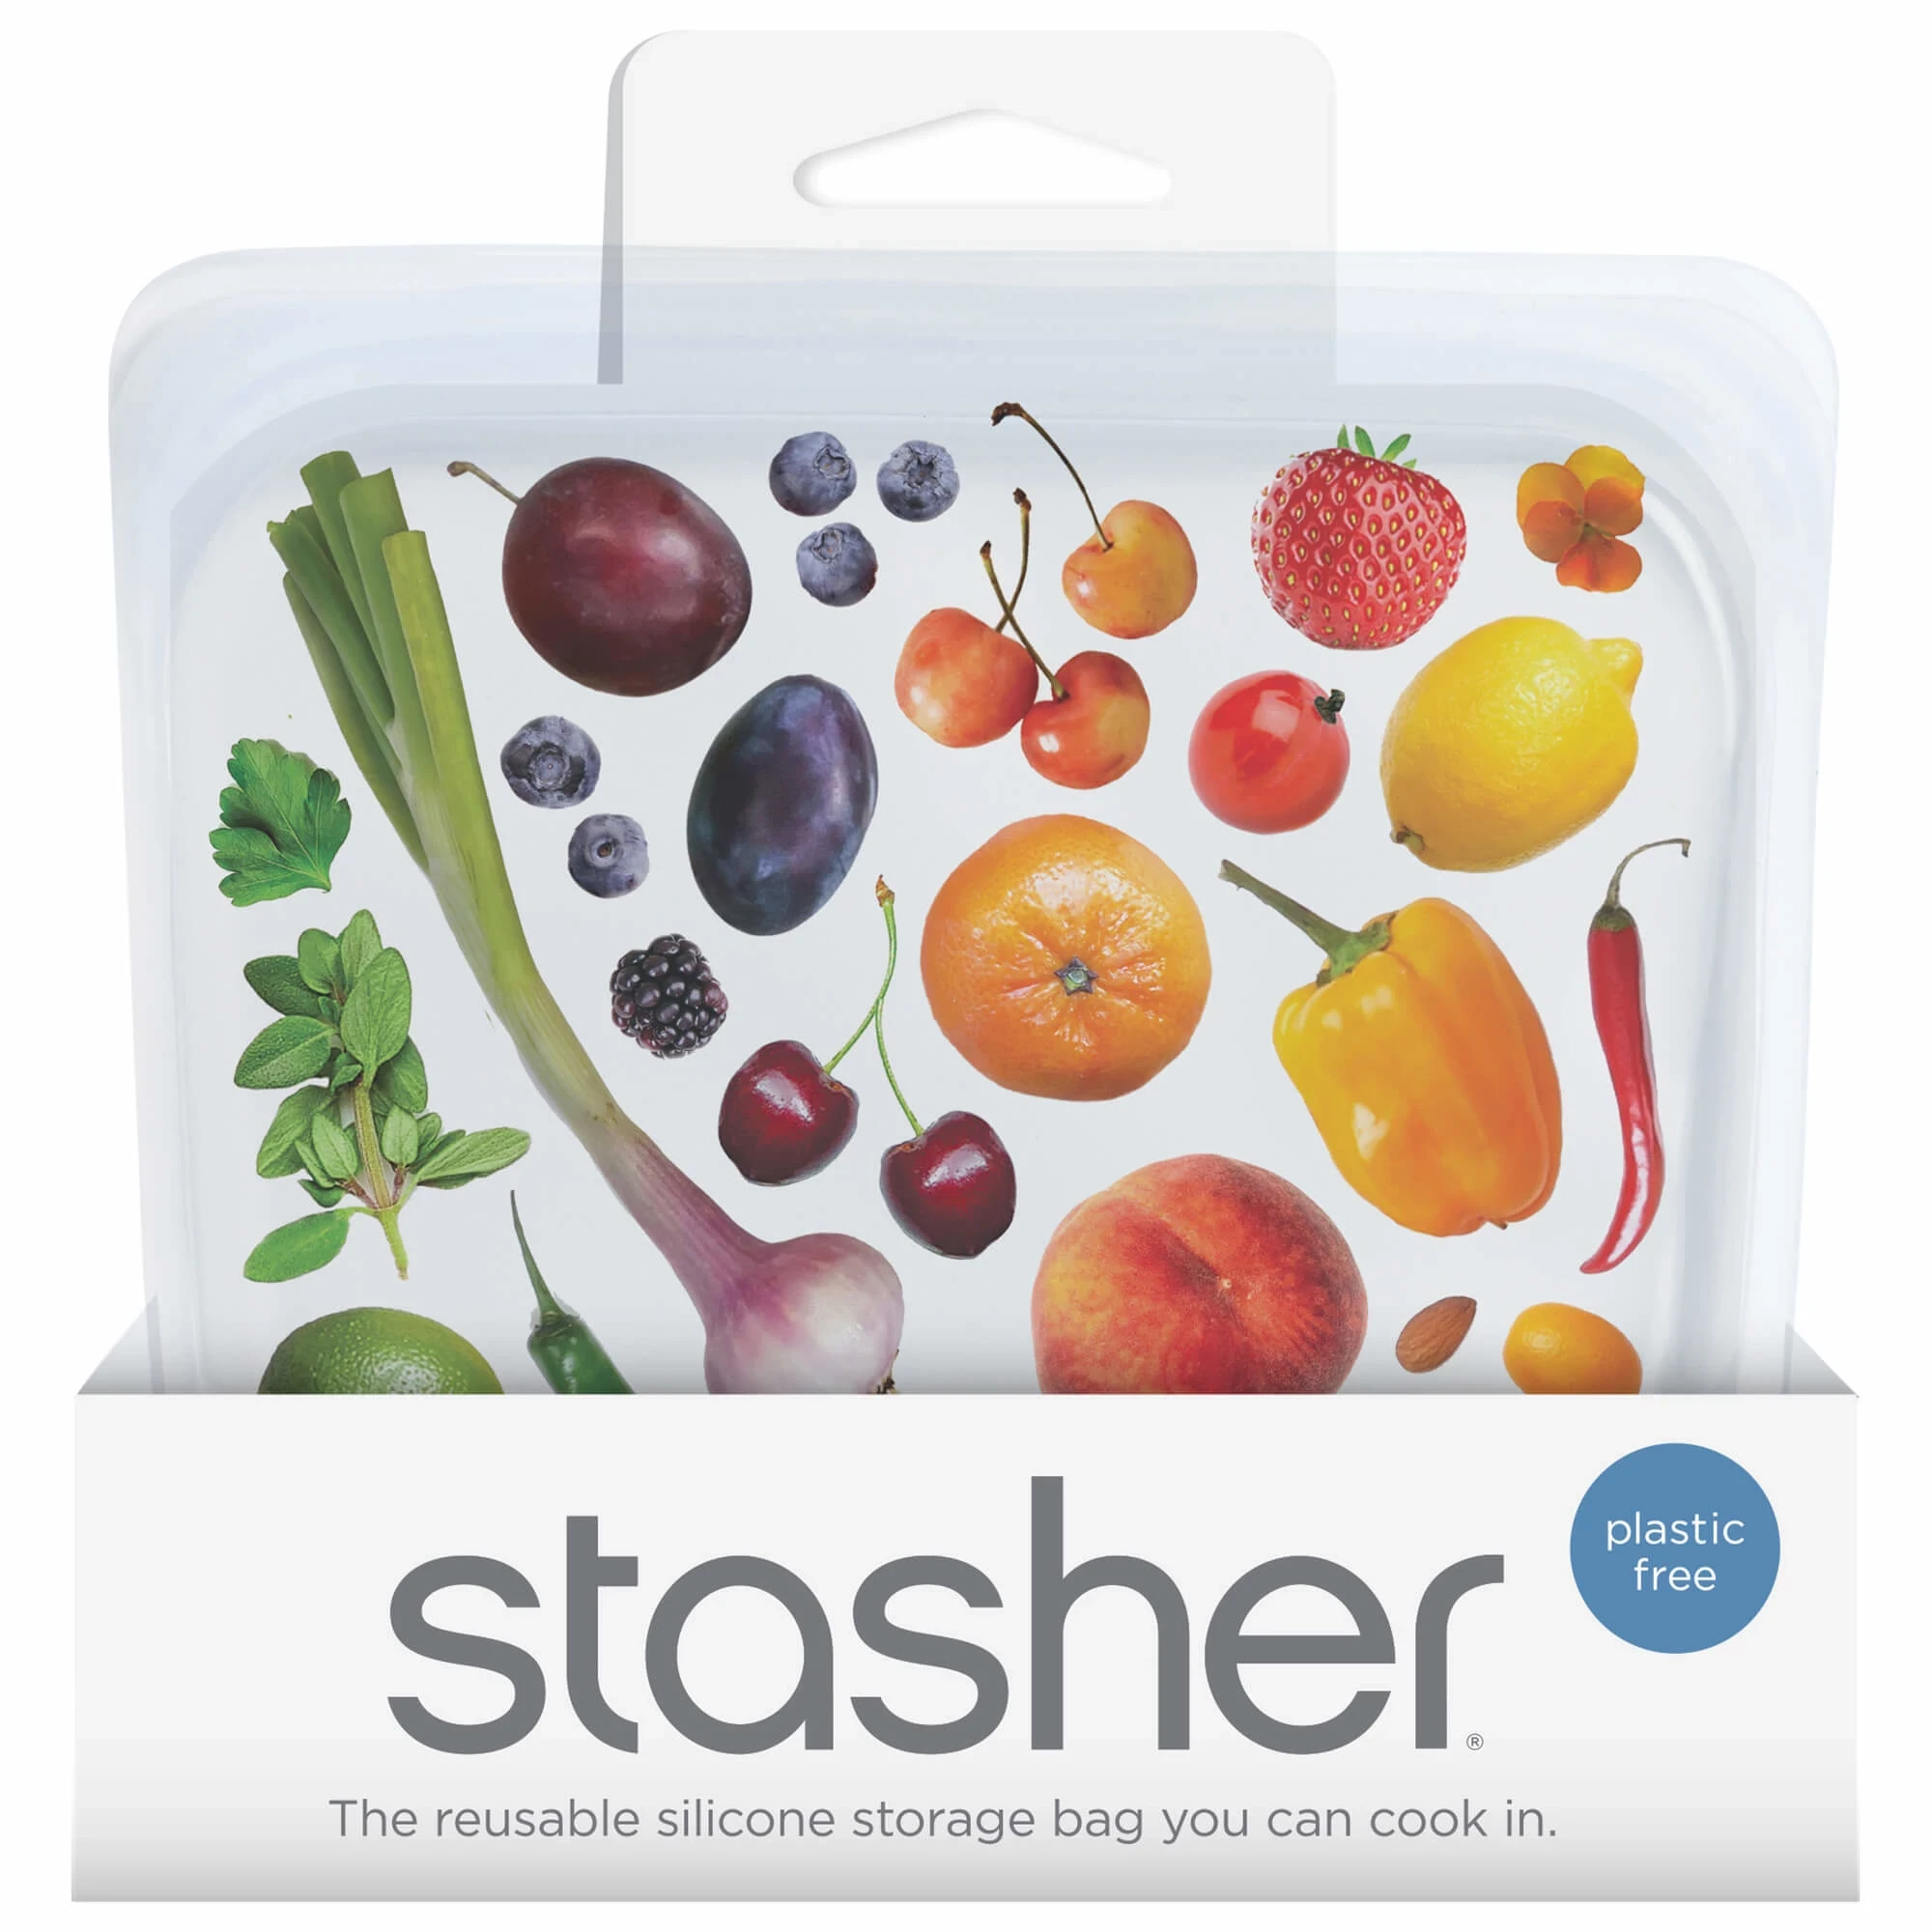 Clear Stasher Sandwich Bag in product packaging